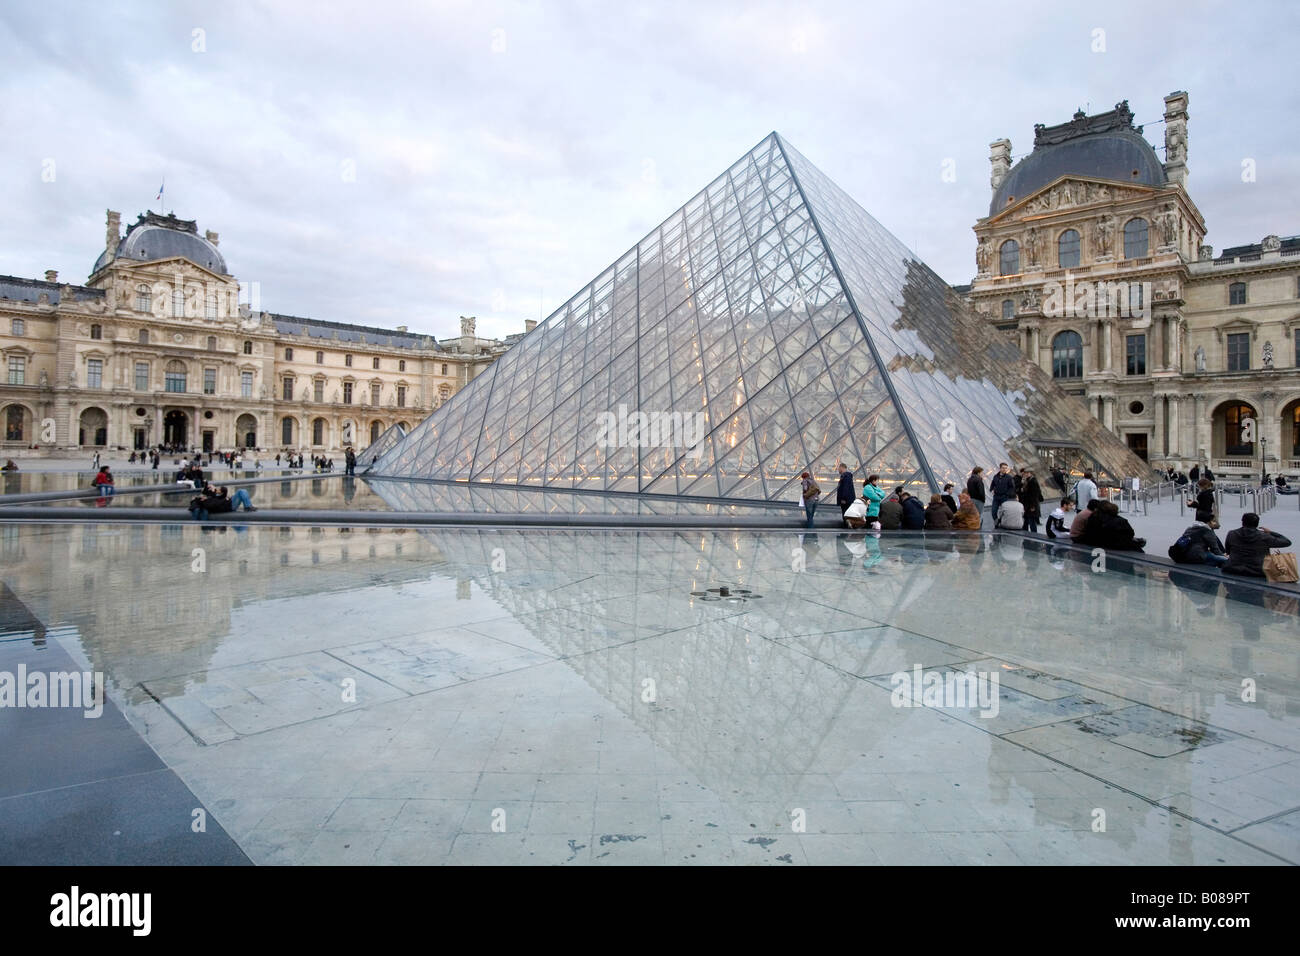 Museum du Louvre and the glass pyramid Paris France Stock Photo